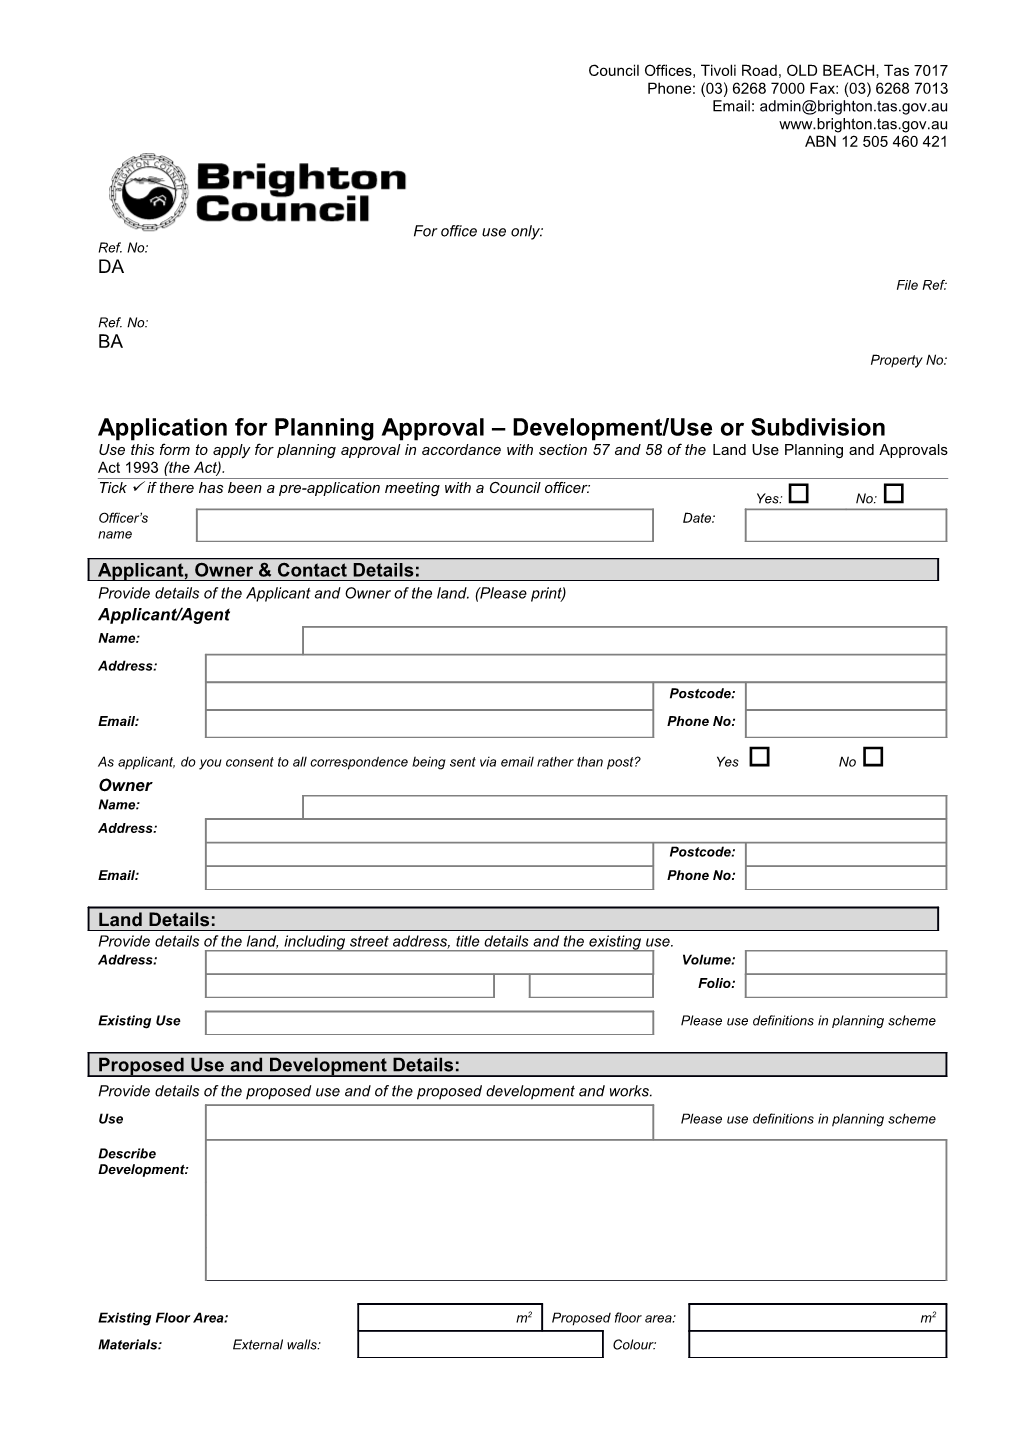 Application for Planning Approval Development/Use Or Subdivision